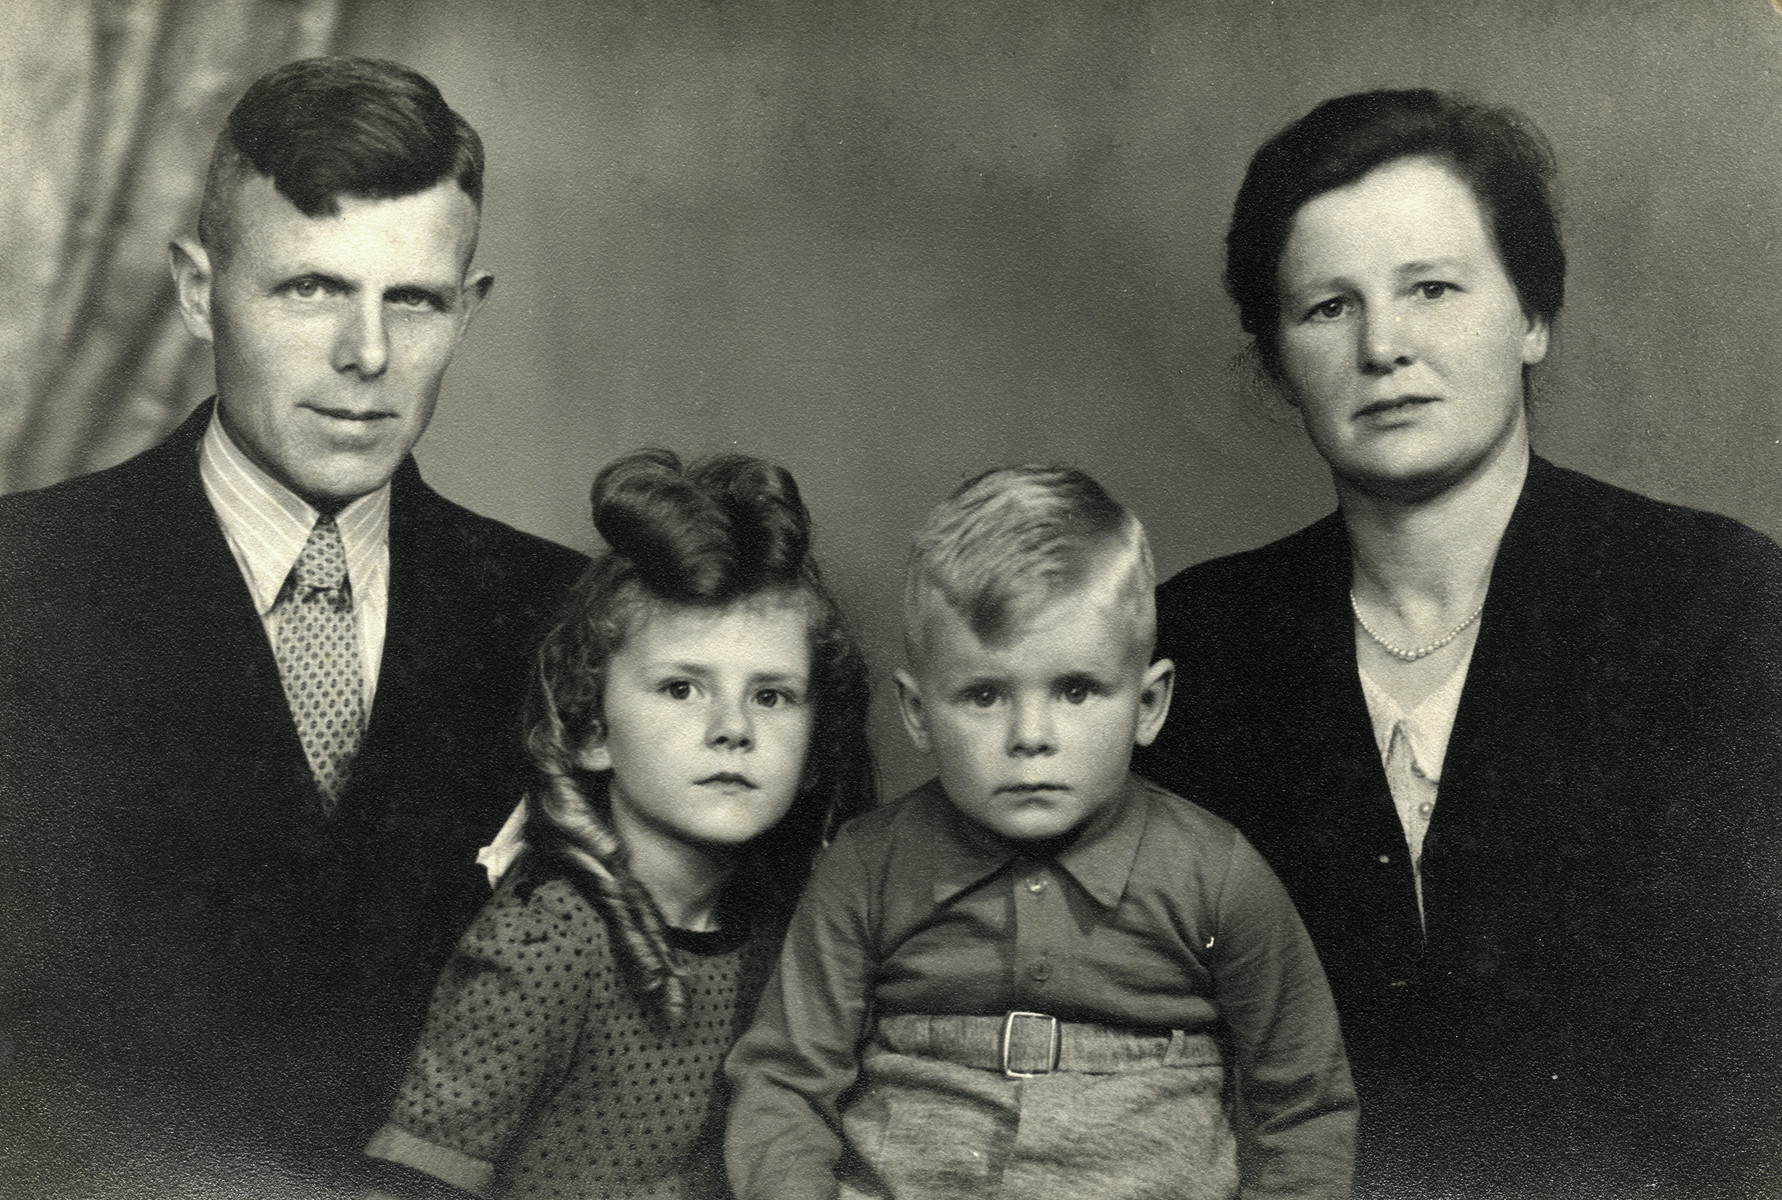 Studio portrait of the Veerman family, Dutch rescuers and Righteous Among the Nations.

Pictured are Reinier and Margaret Veerman and their two children.